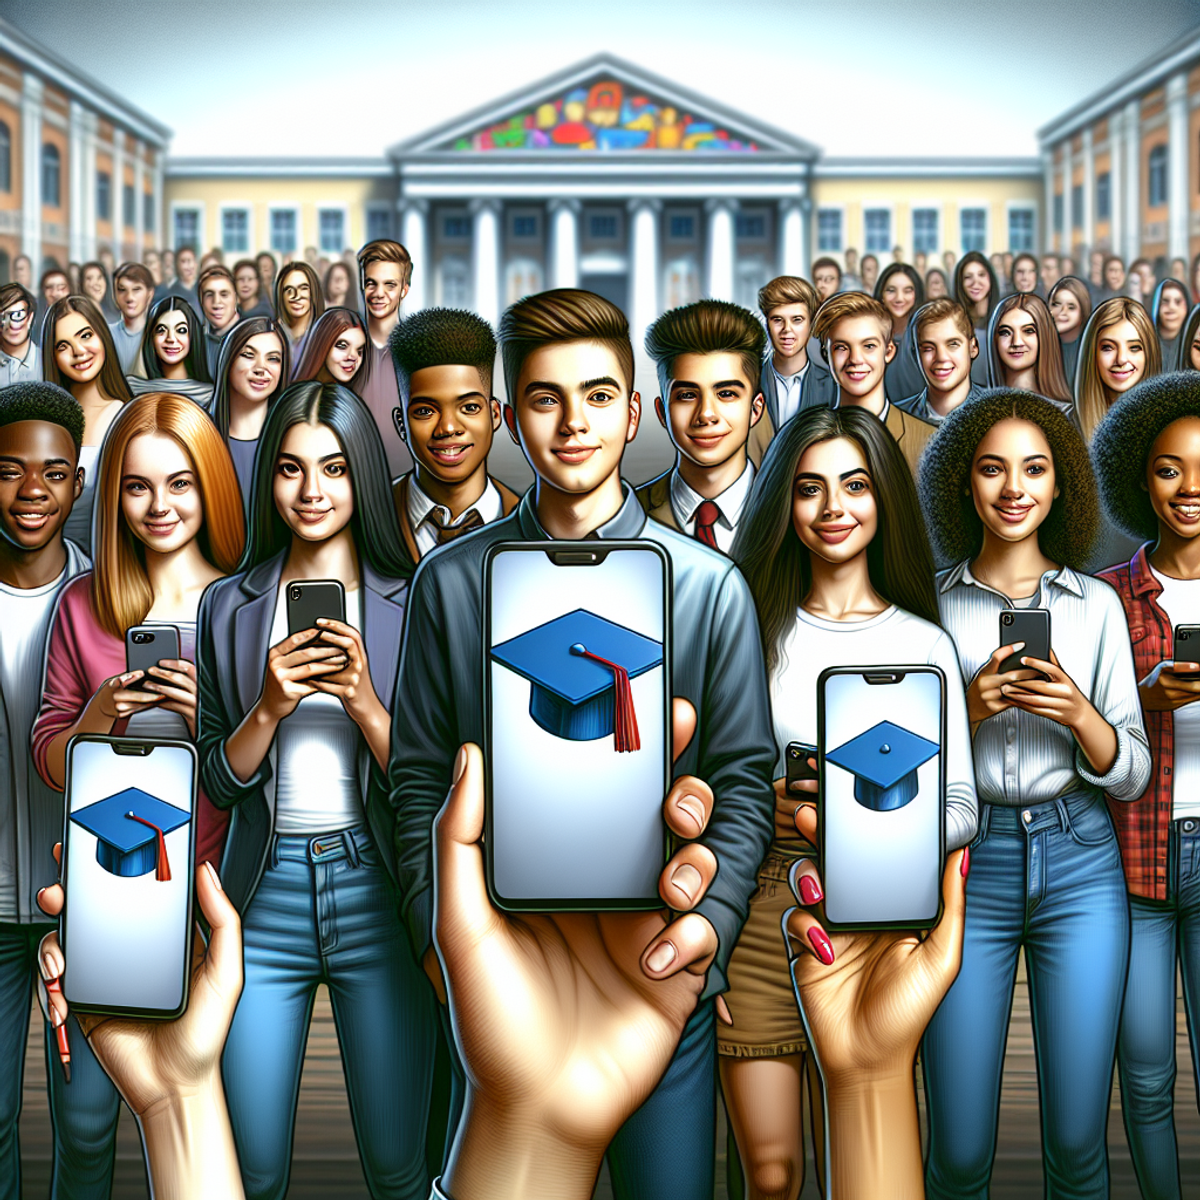 A diverse group of students holding smartphones with graduation cap symbols on the screens, standing confidently together in front of a decorated educational institution.